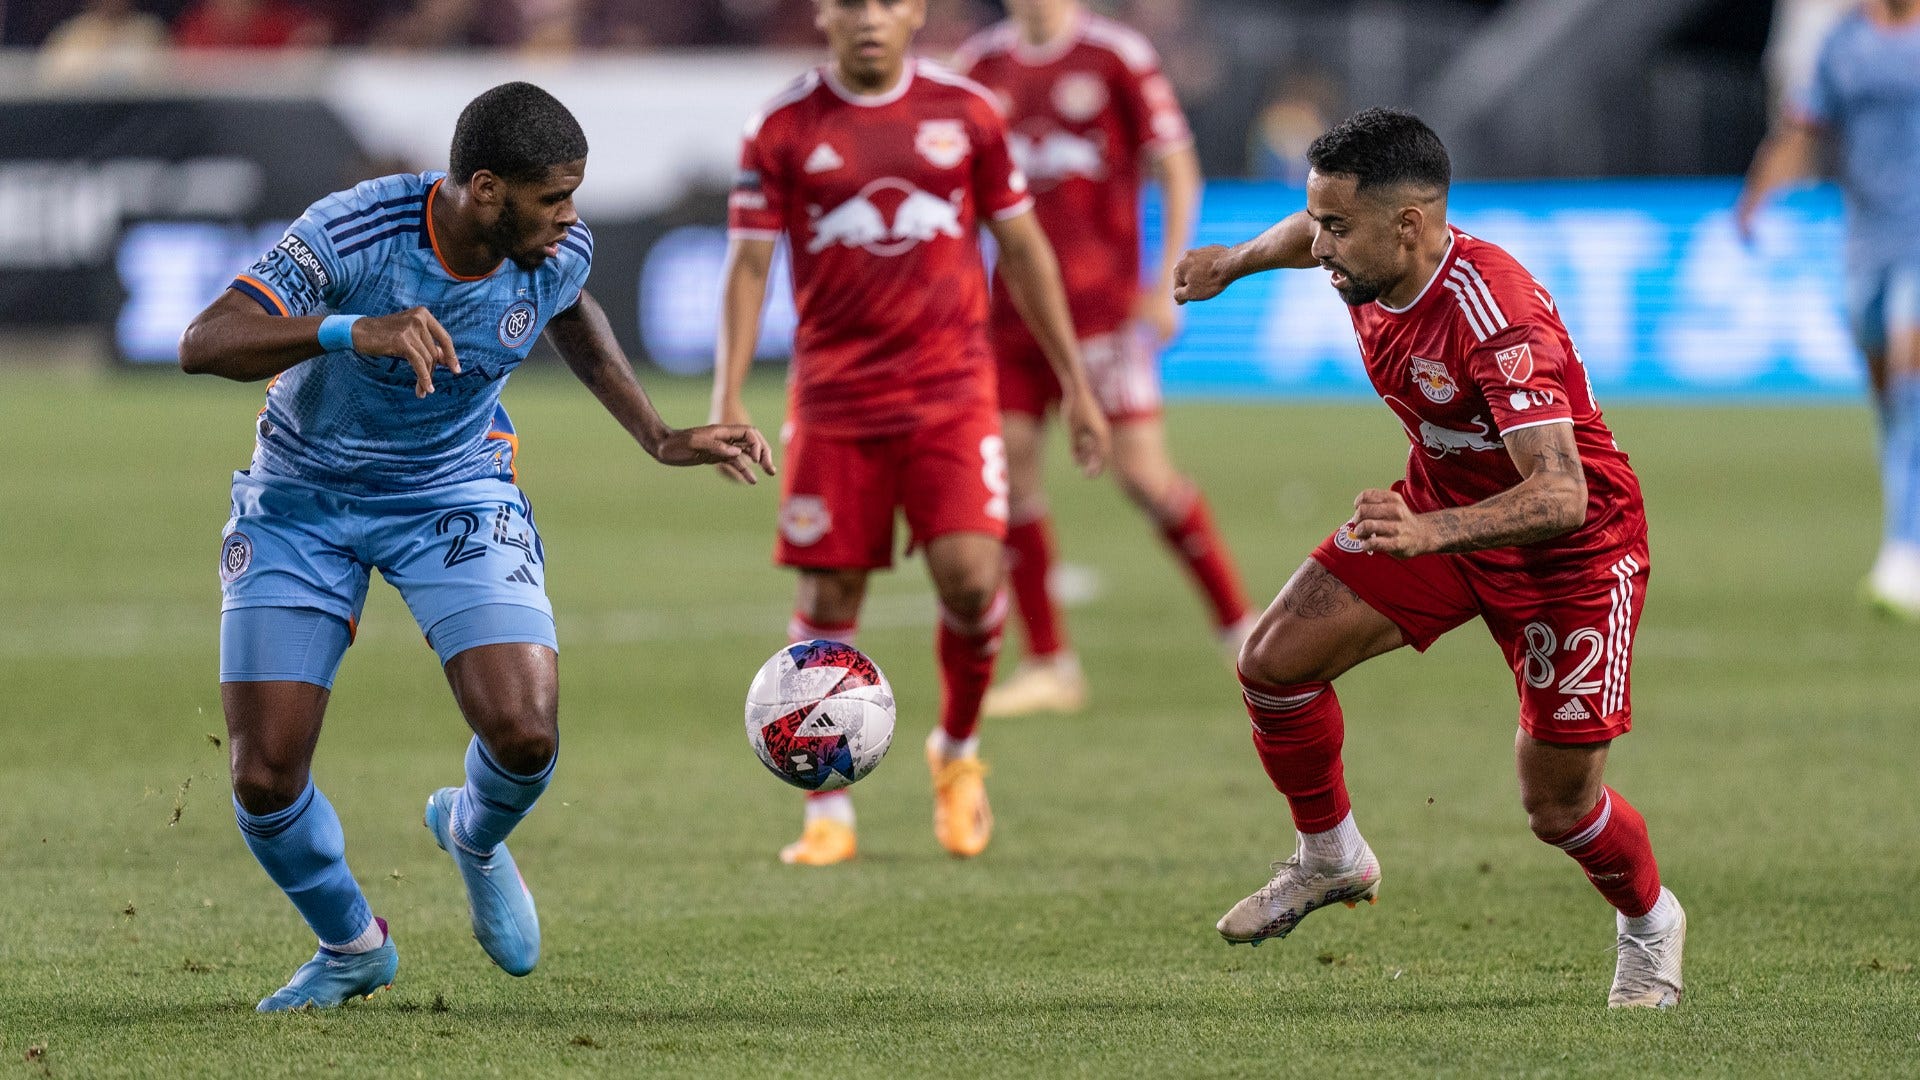 New York City FC vs New York Red Bulls Live stream, TV channel, kick-off time and where to watch Goal US